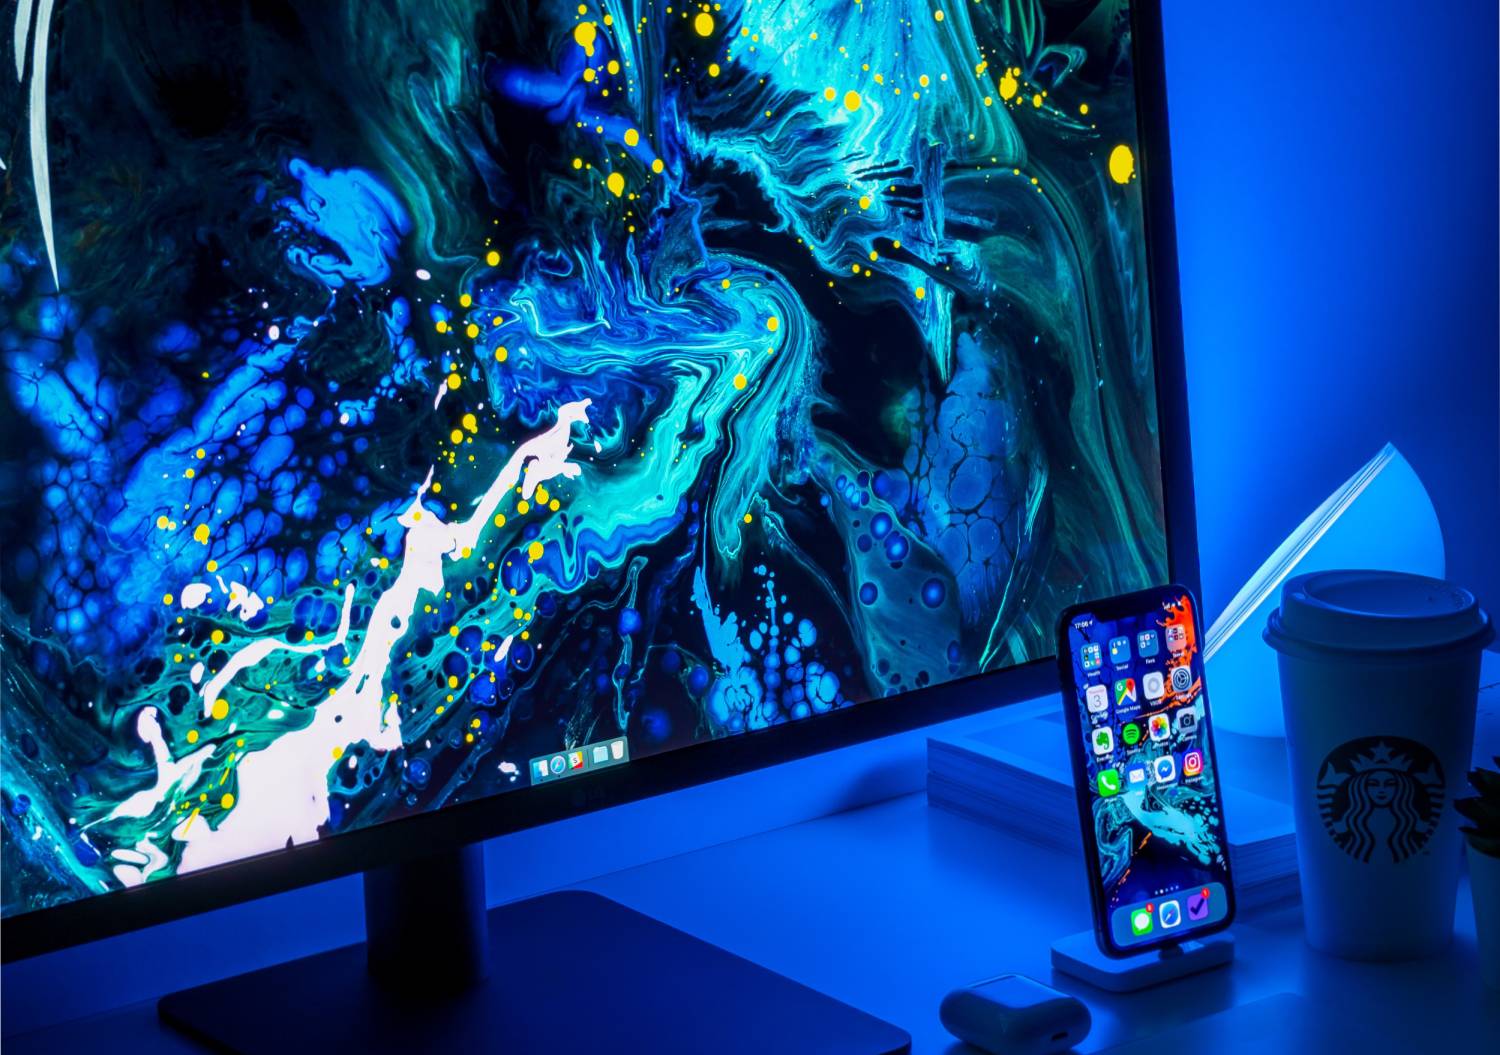 Where to find great wallpapers to spice up your devices | Popular Science